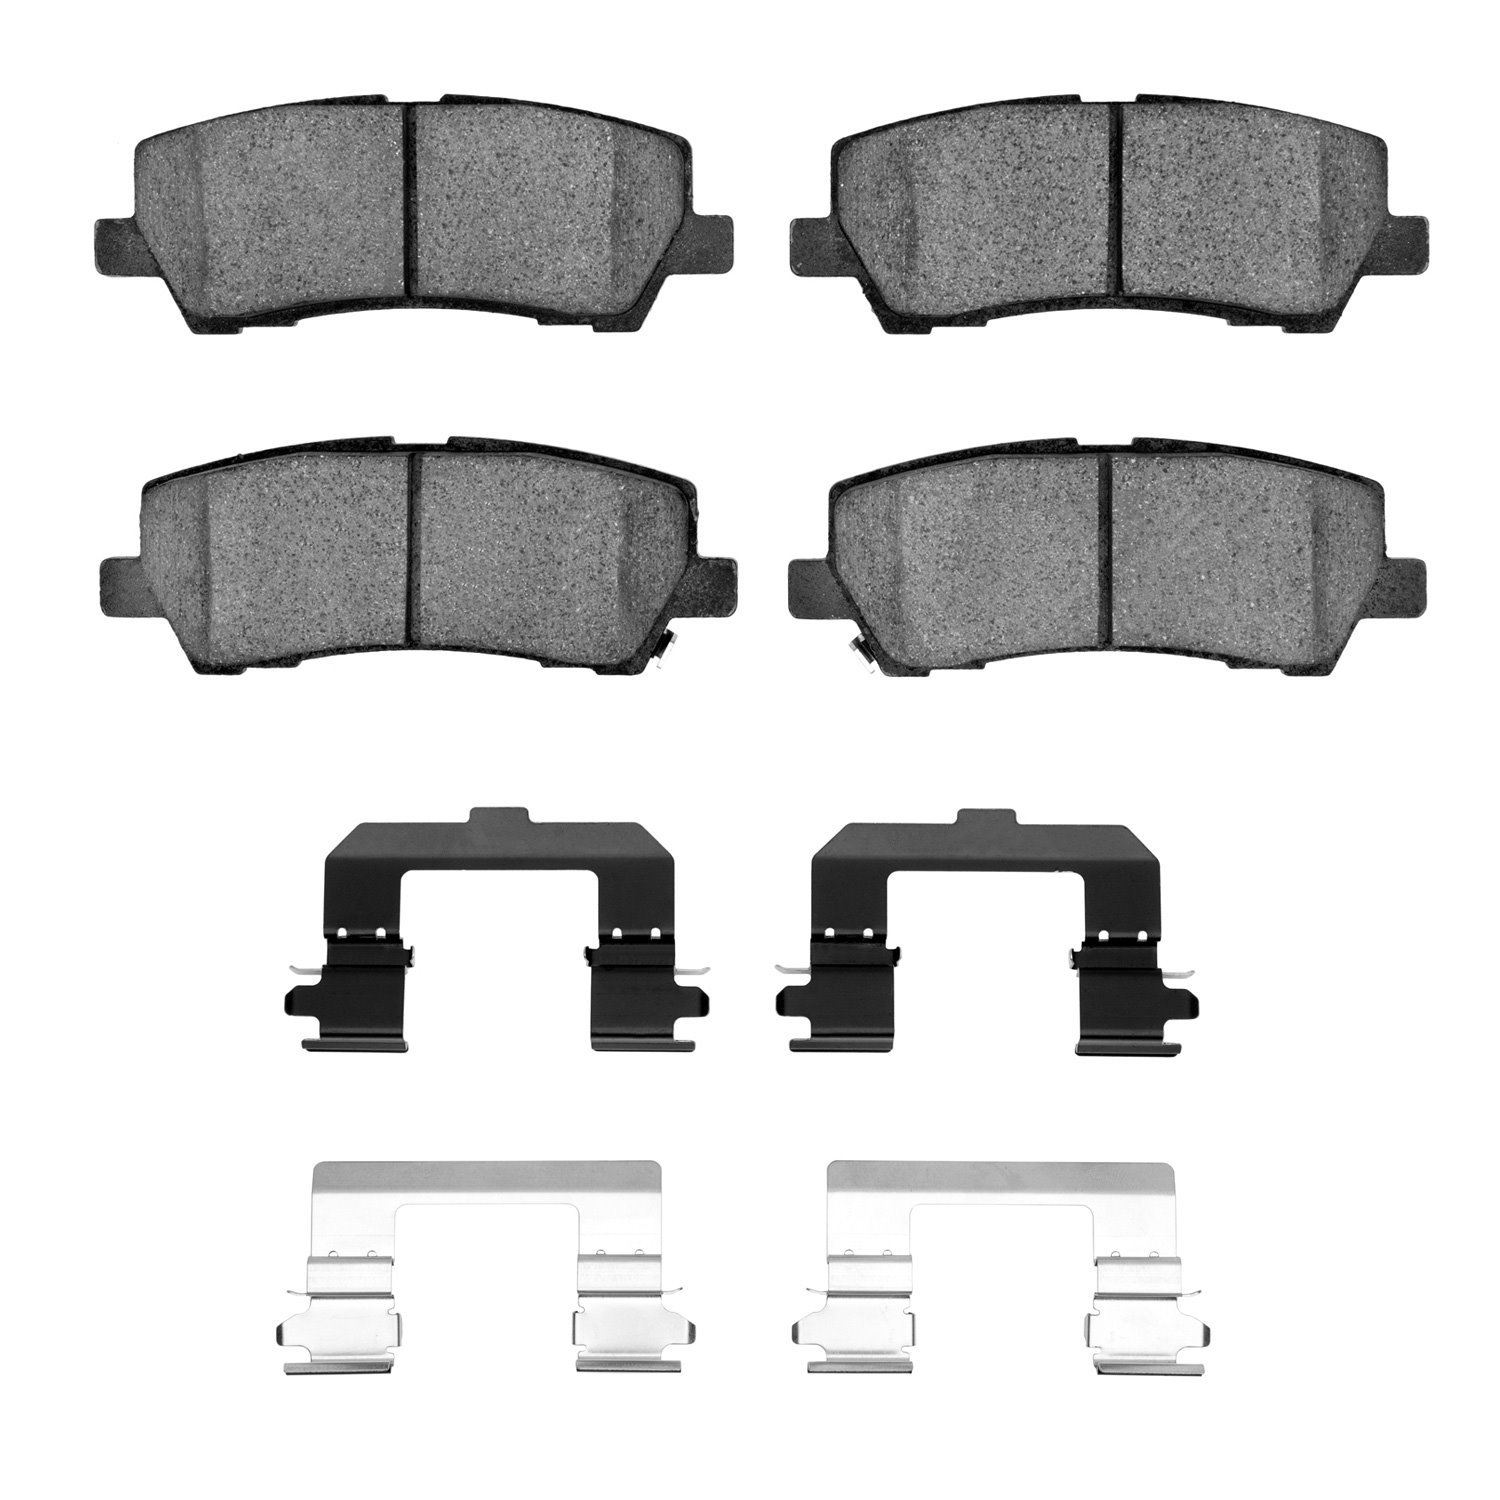 1310-1793-02 3000-Series Ceramic Brake Pads & Hardware Kit, Fits Select Ford/Lincoln/Mercury/Mazda, Position: Rear